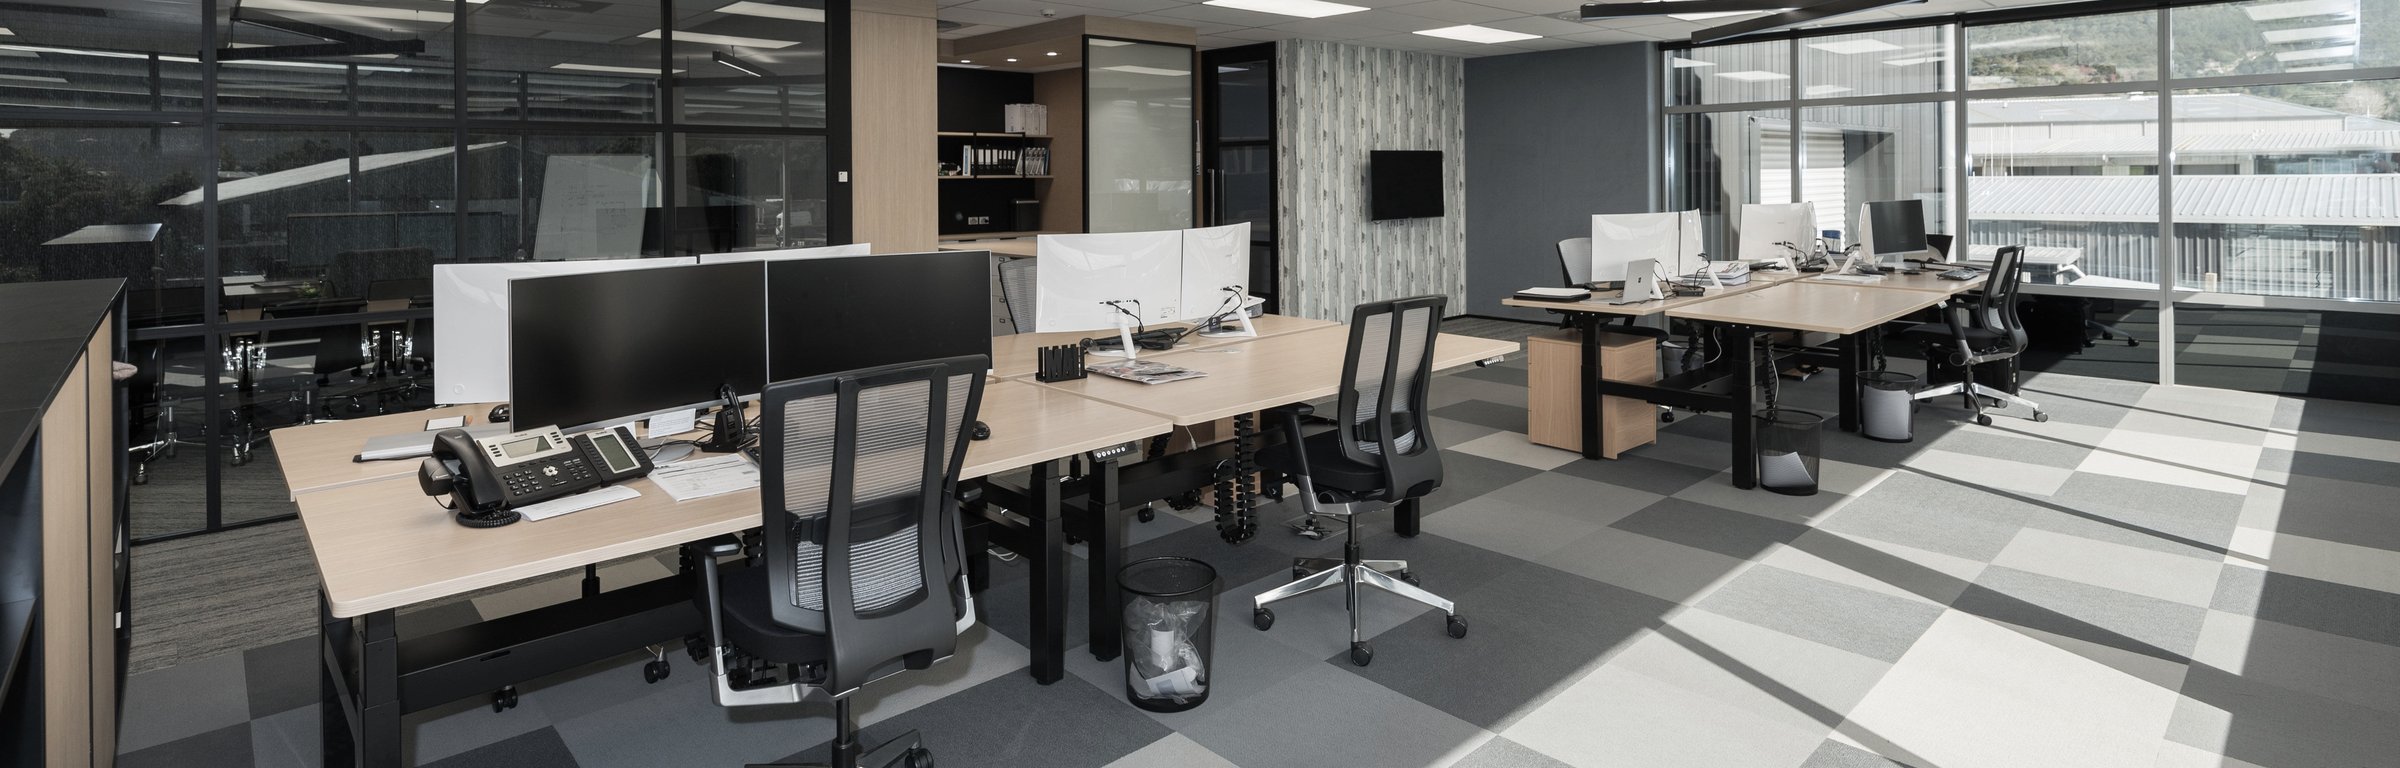 Office furniture in the era of hybrid working | ArchiPro NZ